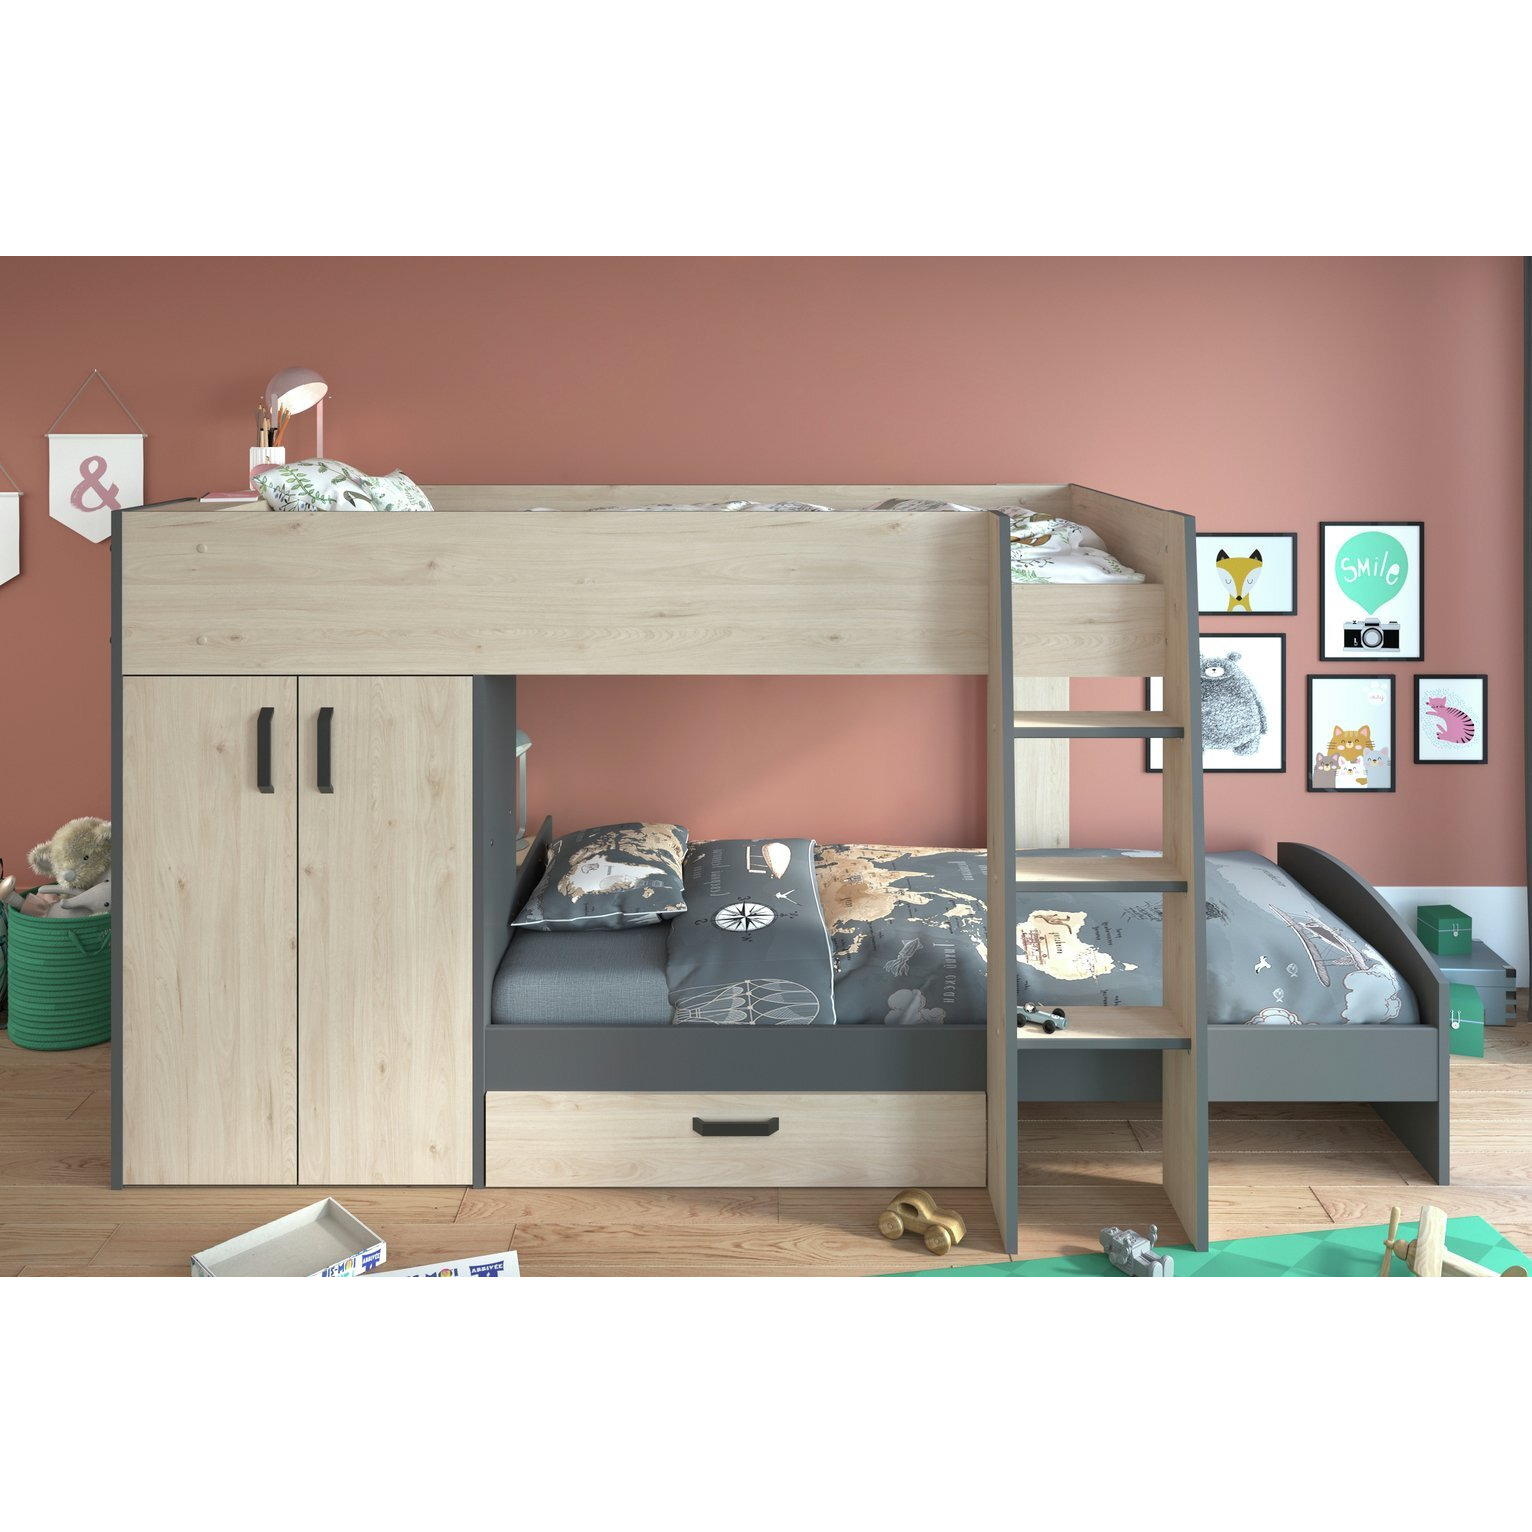 Parisot Bunk Bed with Storage and Mattress - Oak and Grey - image 1